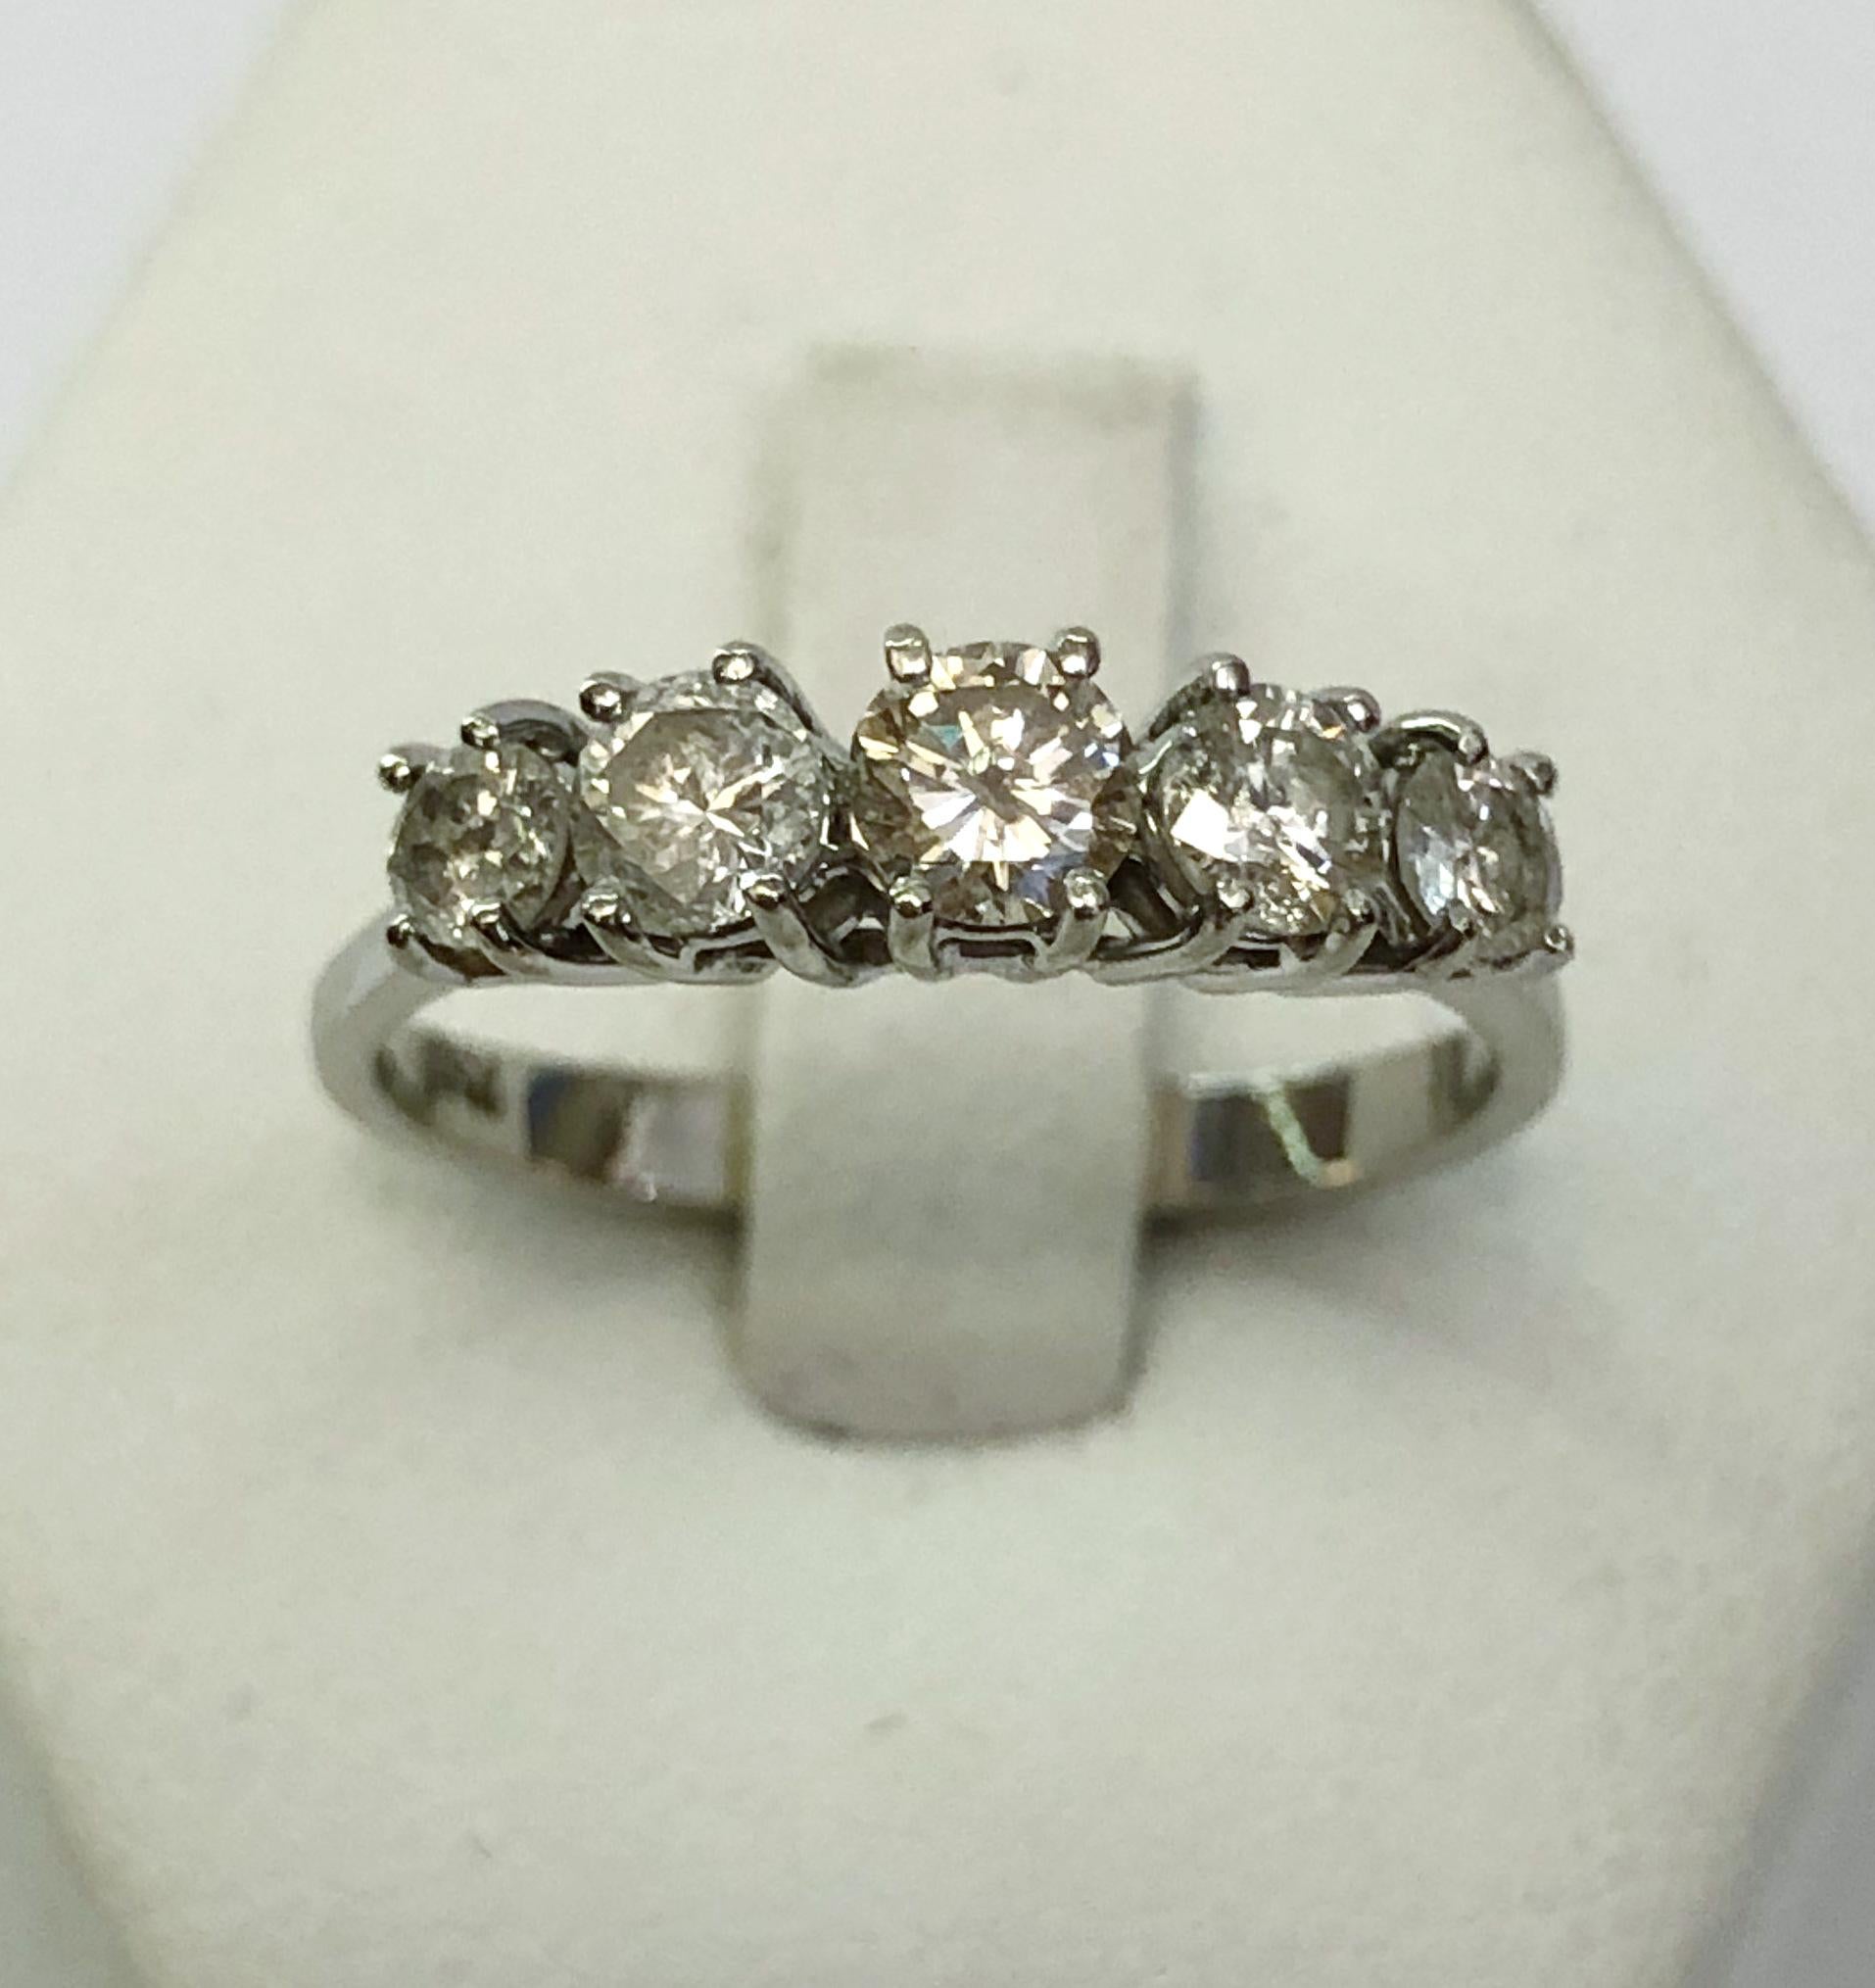 18 karat white gold rivier ring with 5 brilliant diamonds for a total of 0.7 carats / Made in Italy 1970s
Ring size US 4